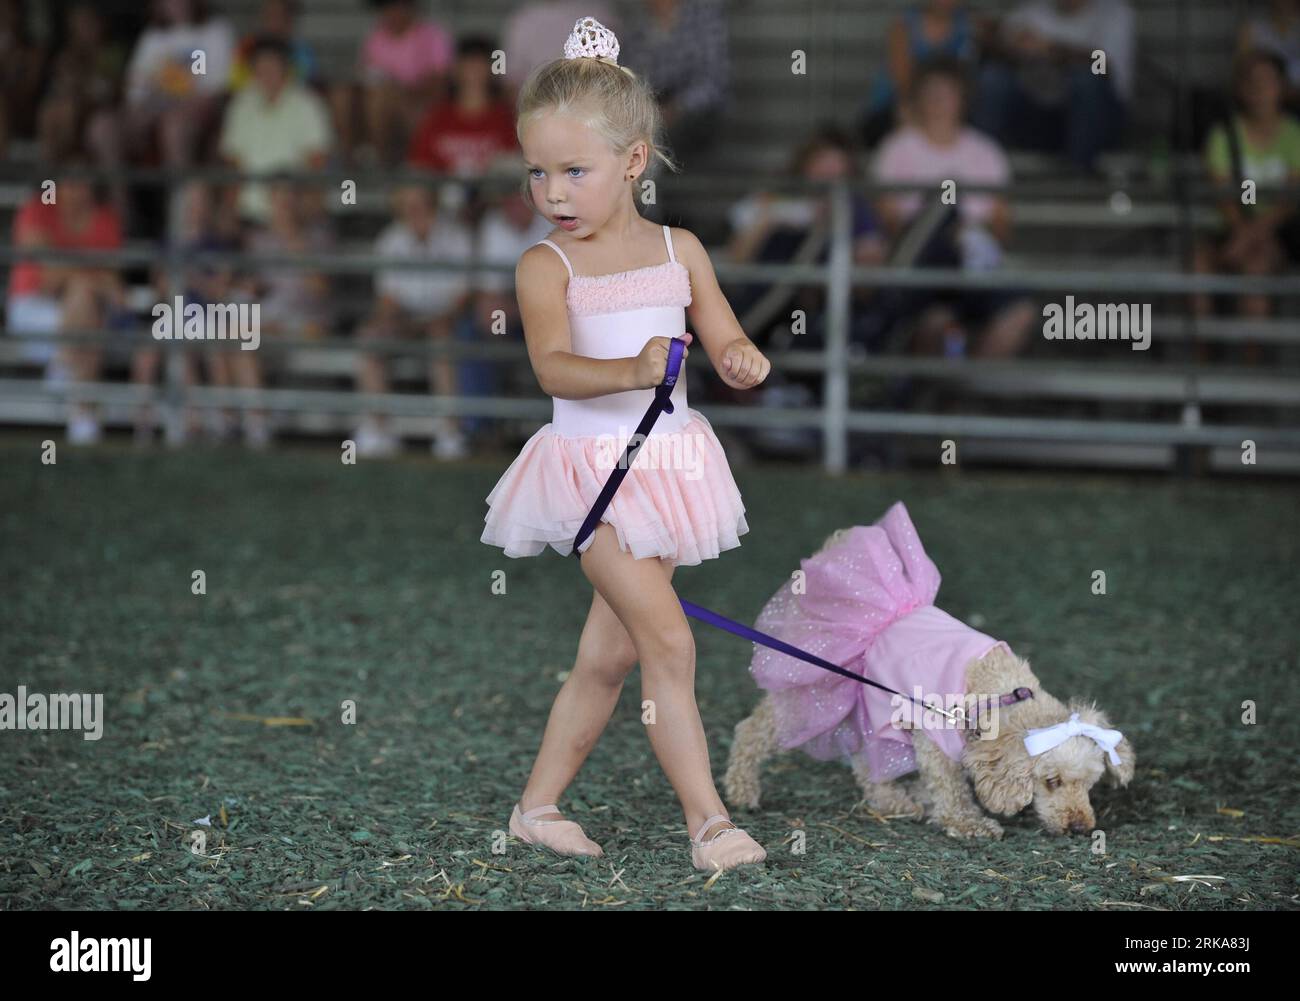 Bildnummer: 54283750  Datum: 08.08.2010  Copyright: imago/Xinhua A girl leads her pet dog during the pretty animal contest at the annual Howard County Fair in West Friendship, Maryland, the United States, Aug. 8, 2010. (Xinhua/Zhang Jun) (msq) U.S.-MARYLAND-PRETTY ANIMAL CONTEST PUBLICATIONxNOTxINxCHN Gesellschaft Messe Landwirtschaft Landwirtschaftsmesse Tiere Wettbewerb Schönheitswettbewerb Kinder Personen kurios Komik kbdig xng 2010 quer Highlight premiumd xint    Bildnummer 54283750 Date 08 08 2010 Copyright Imago XINHUA a Girl leads her Pet Dog during The Pretty Animal Contest AT The Annu Stock Photo